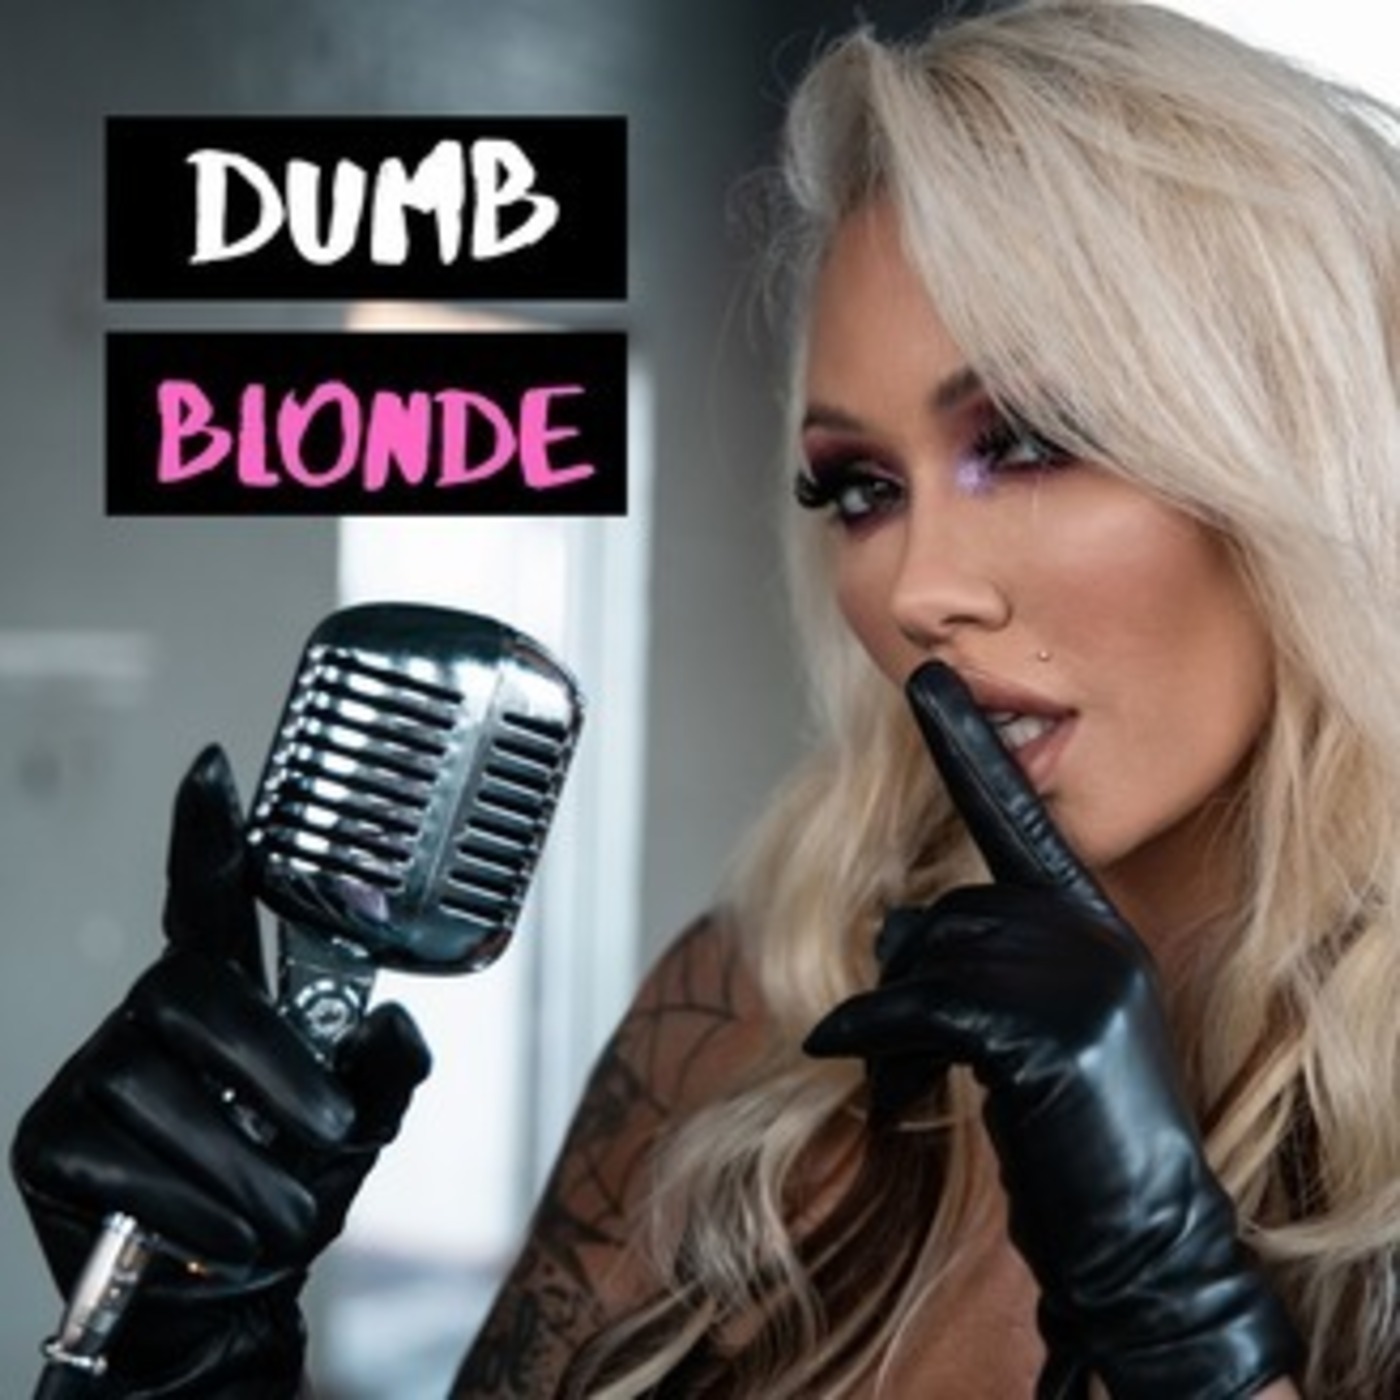 64: Dumb Blonde: Flex With Thane: Group Home, Losing Virginity, & OnlyFans